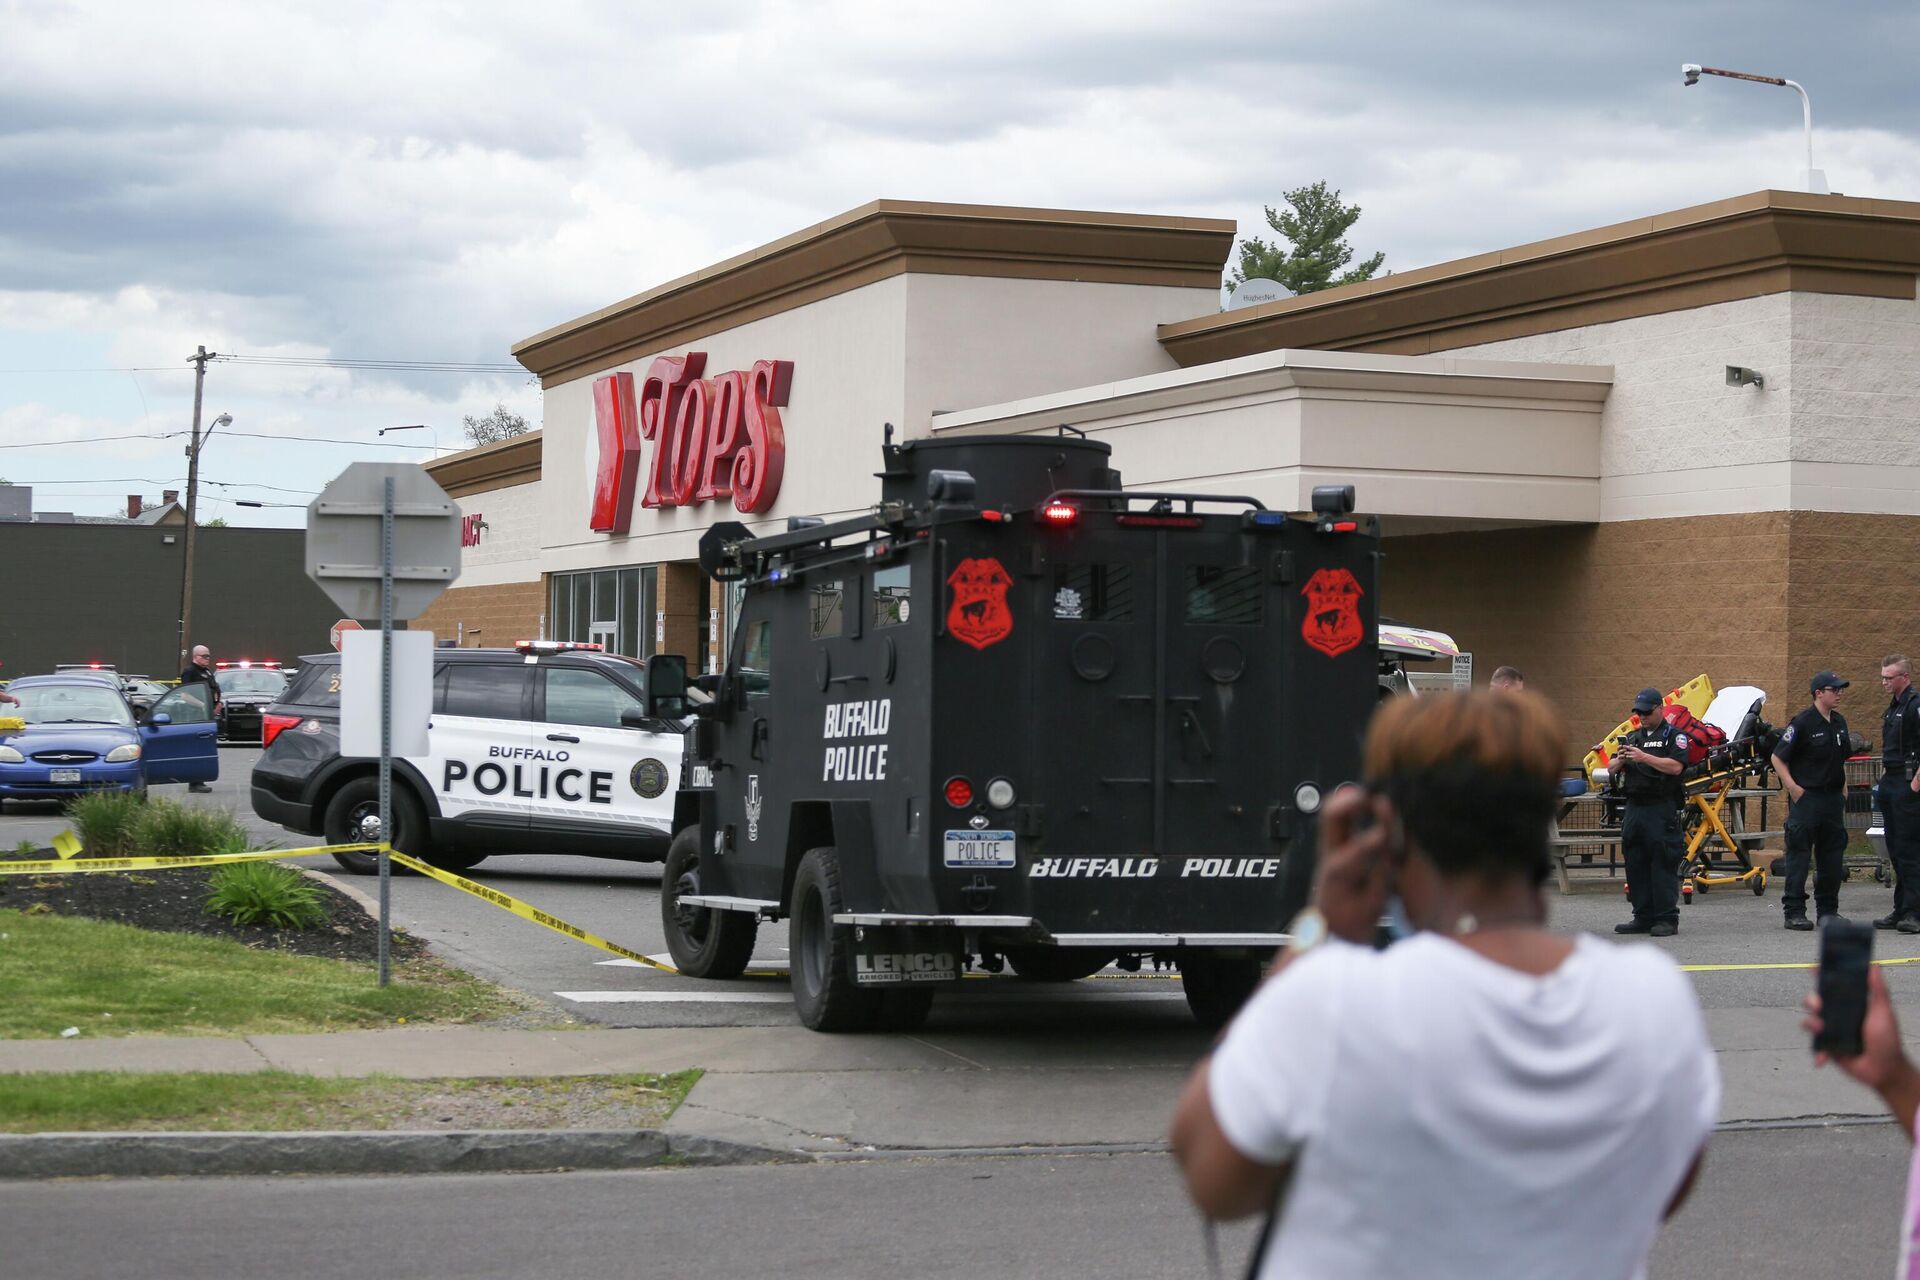 A crowd gathers as police investigate after a shooting at a supermarket on Saturday, May 14, 2022, in Buffalo, N.Y. Multiple people were shot  at the Tops Friendly Market.  Police have notified the public that the alleged shooter was in custody.  - Sputnik International, 1920, 15.05.2022